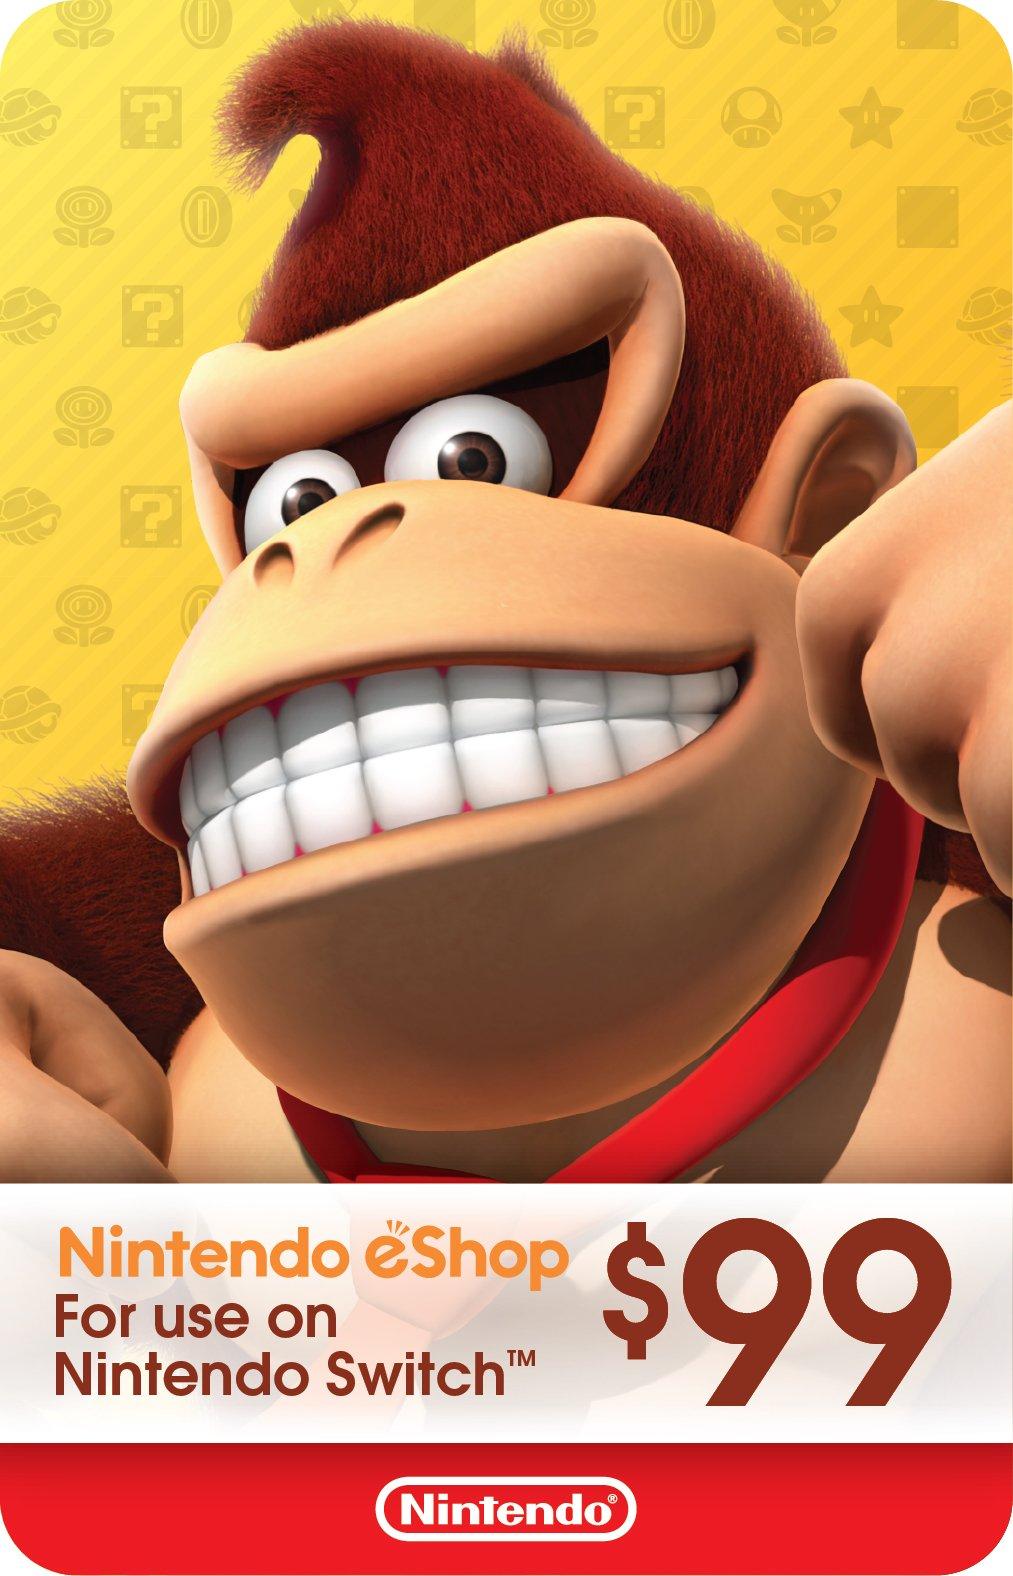 gamestop switch gift card